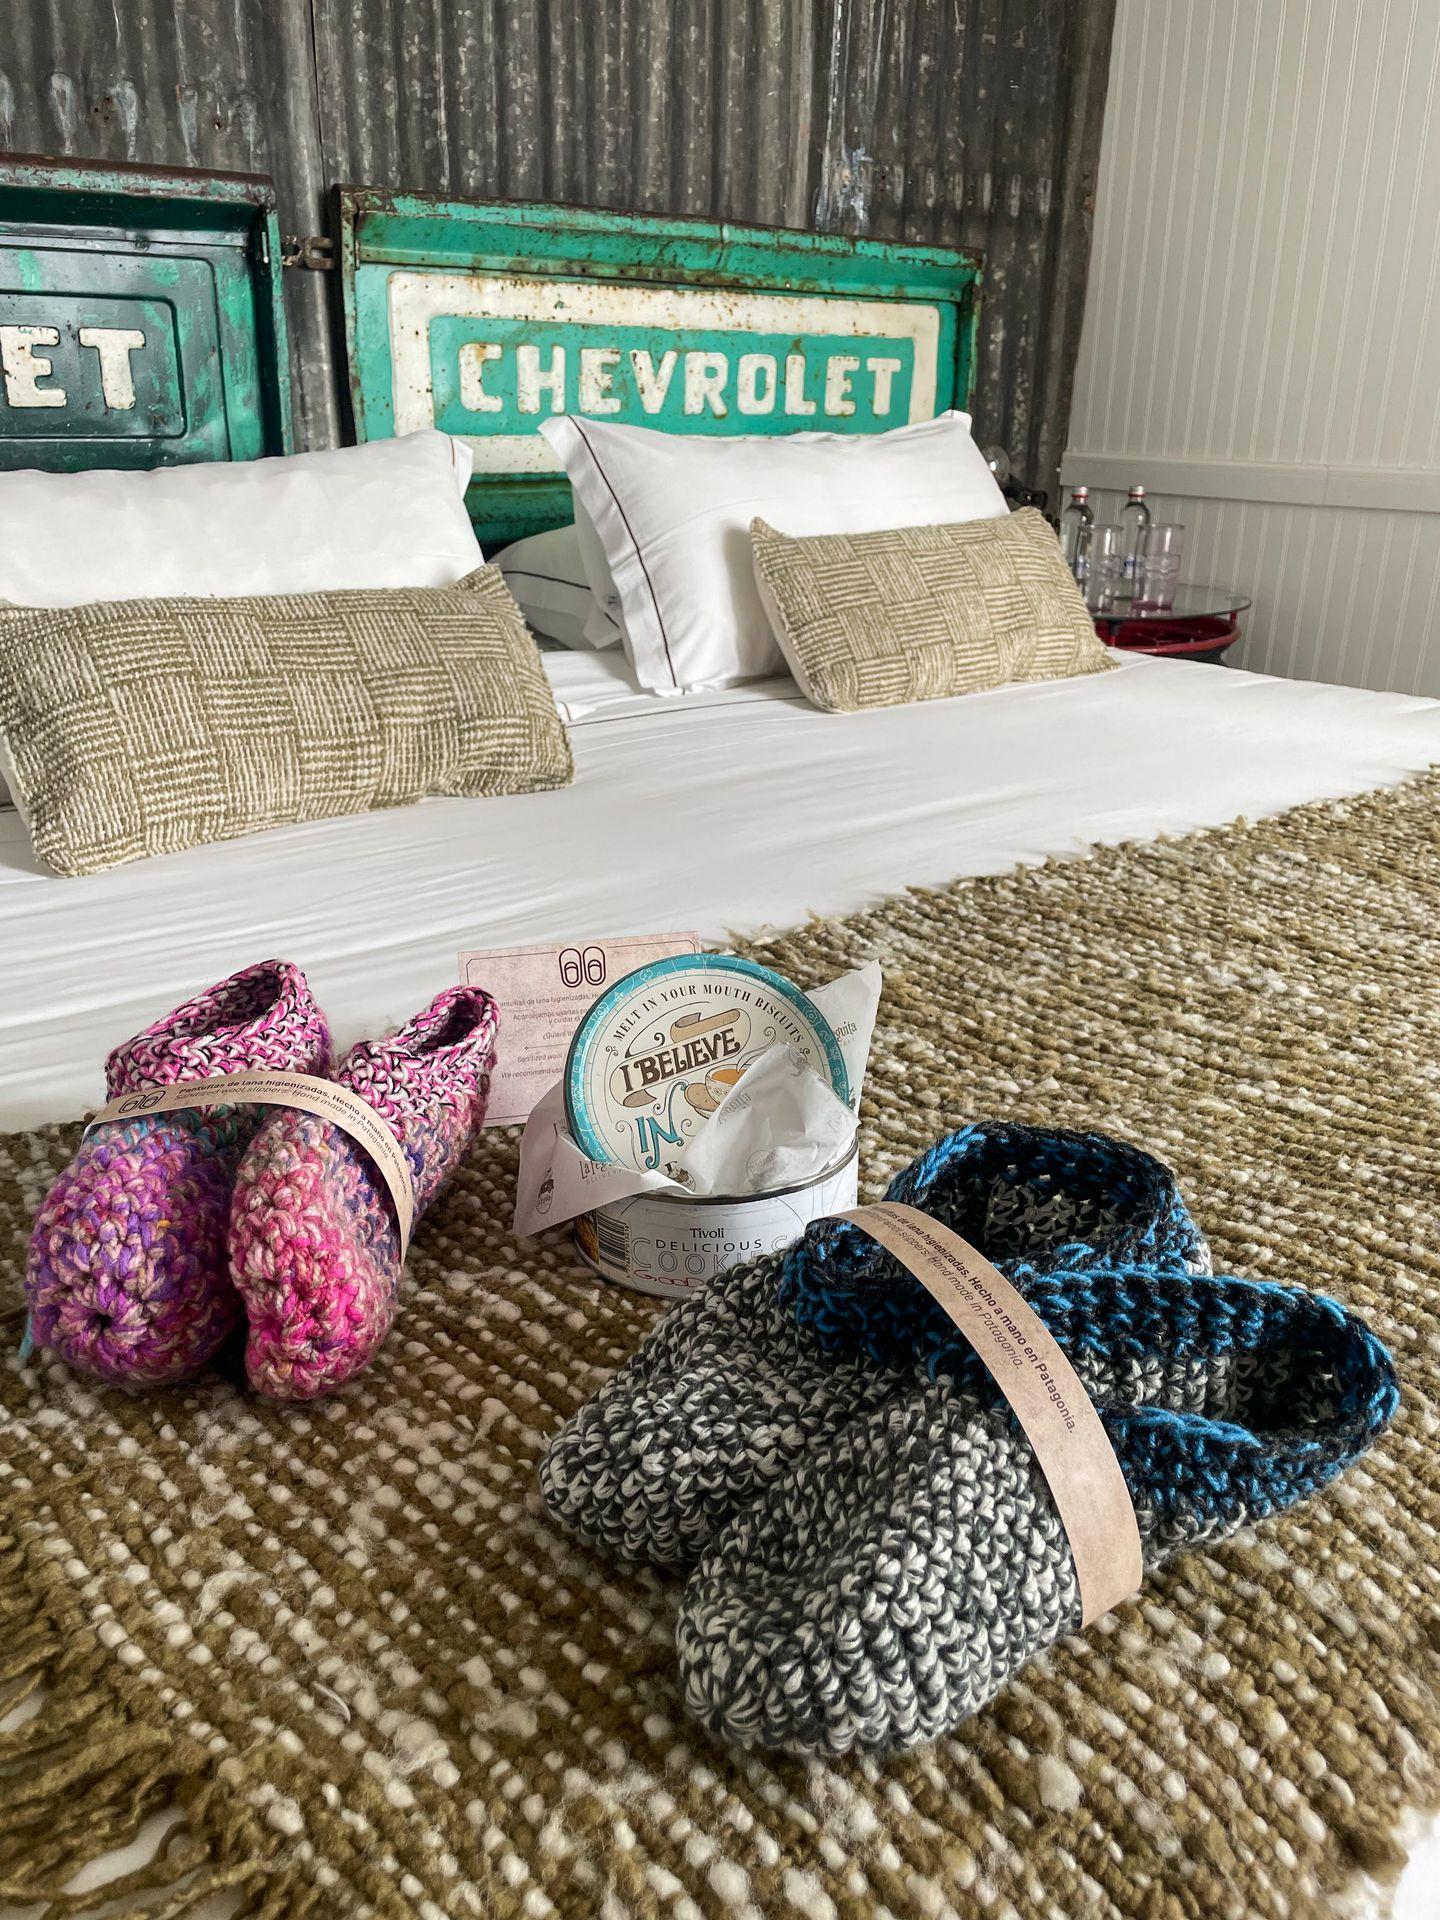 Two pairs of slipper and a tin of chocolate sitting on a bed. Behind the pillows is a piece of vintage sign that reads 'Chevrolet'